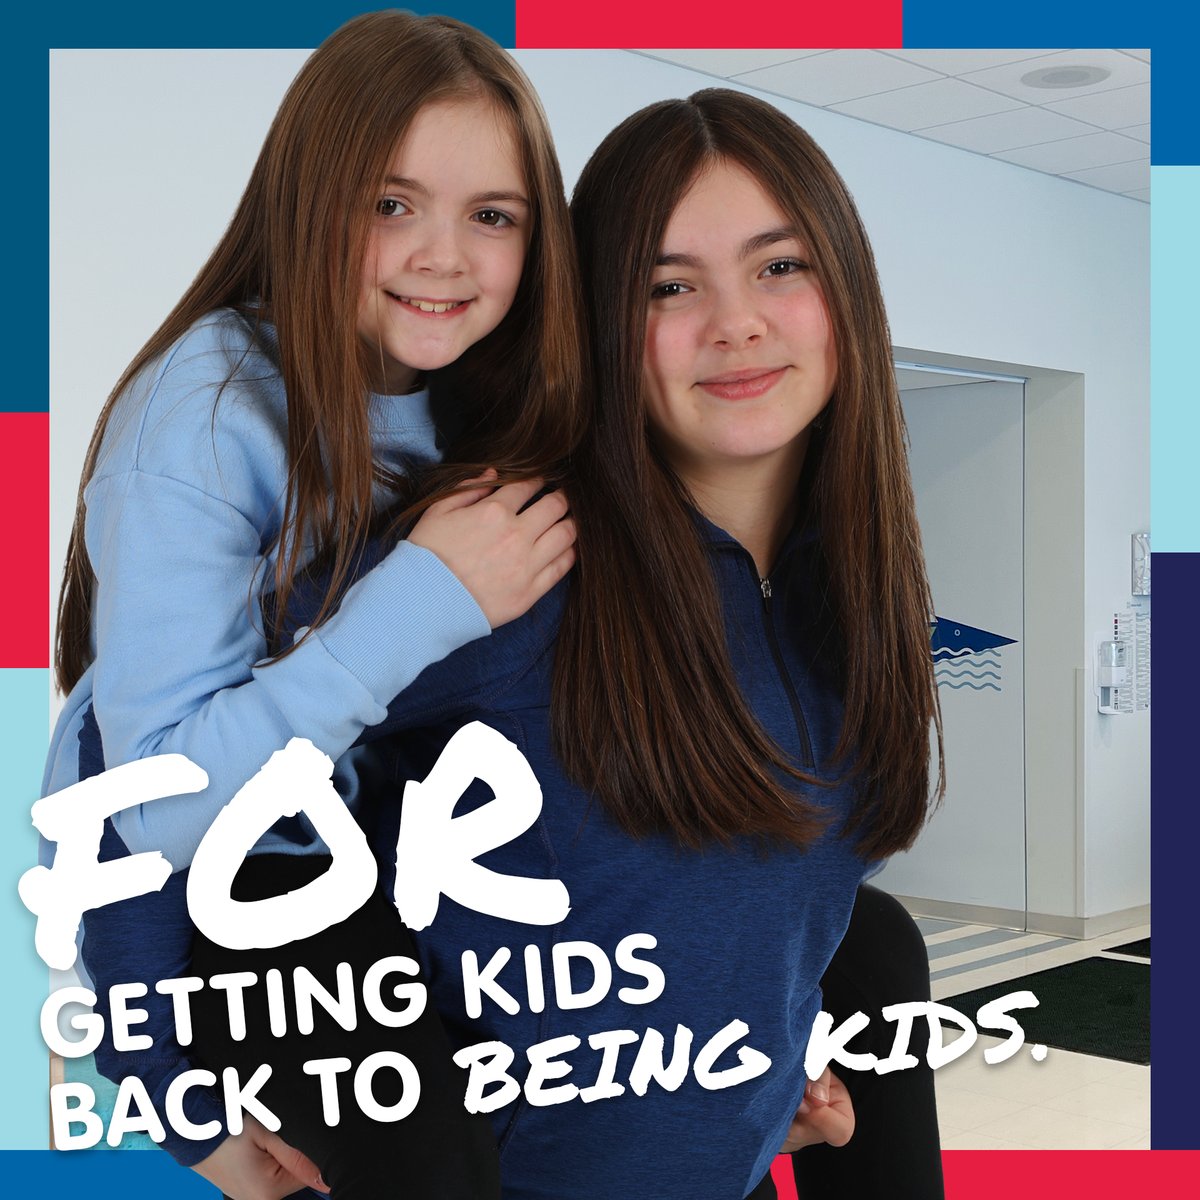 OCH was there for Champion Kids Tessa & Samantha, helping them get back to doing the things they love. Be part of the all-star team getting kids in our community back to being kids - ochbuffalo.org/foundation/don…